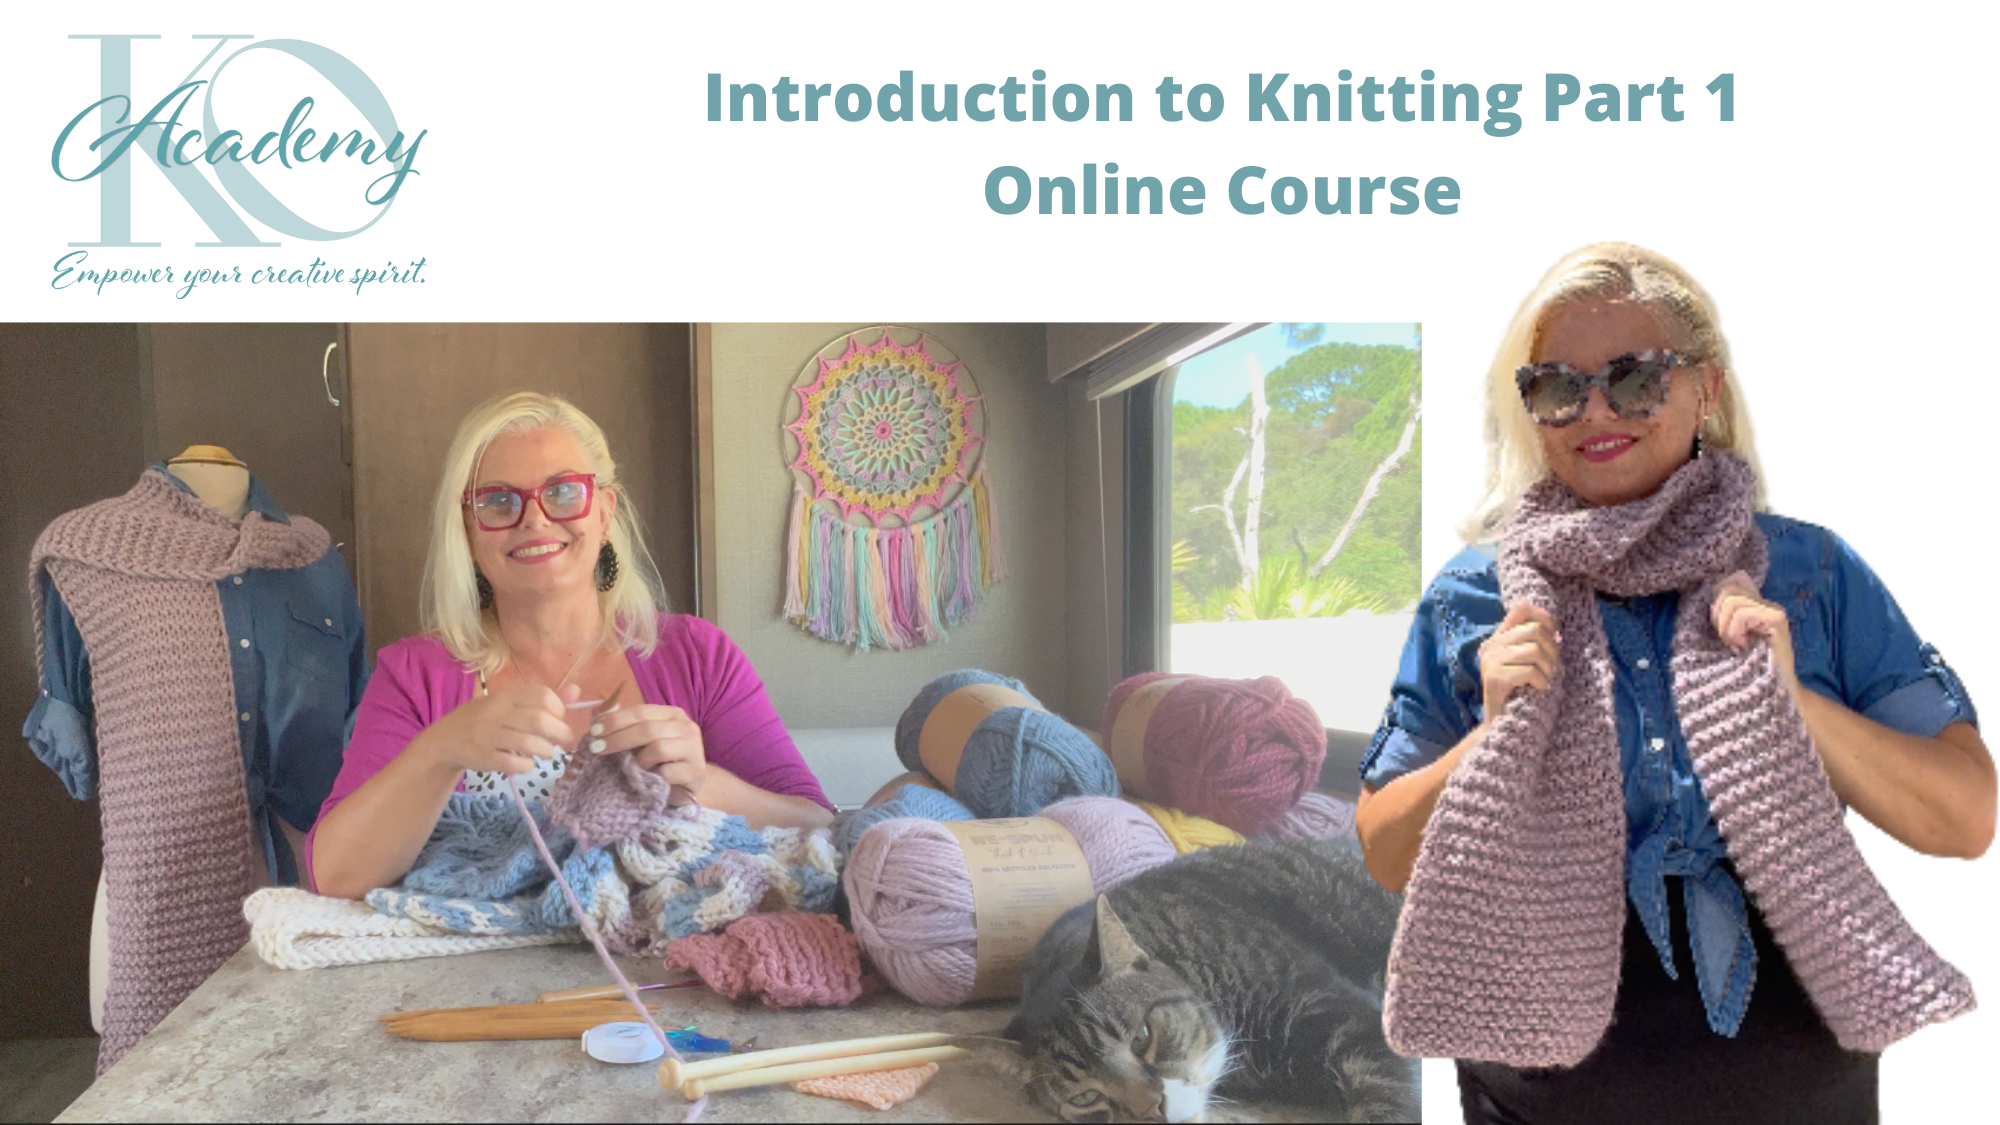 Introduction to Knitting Course Part 1